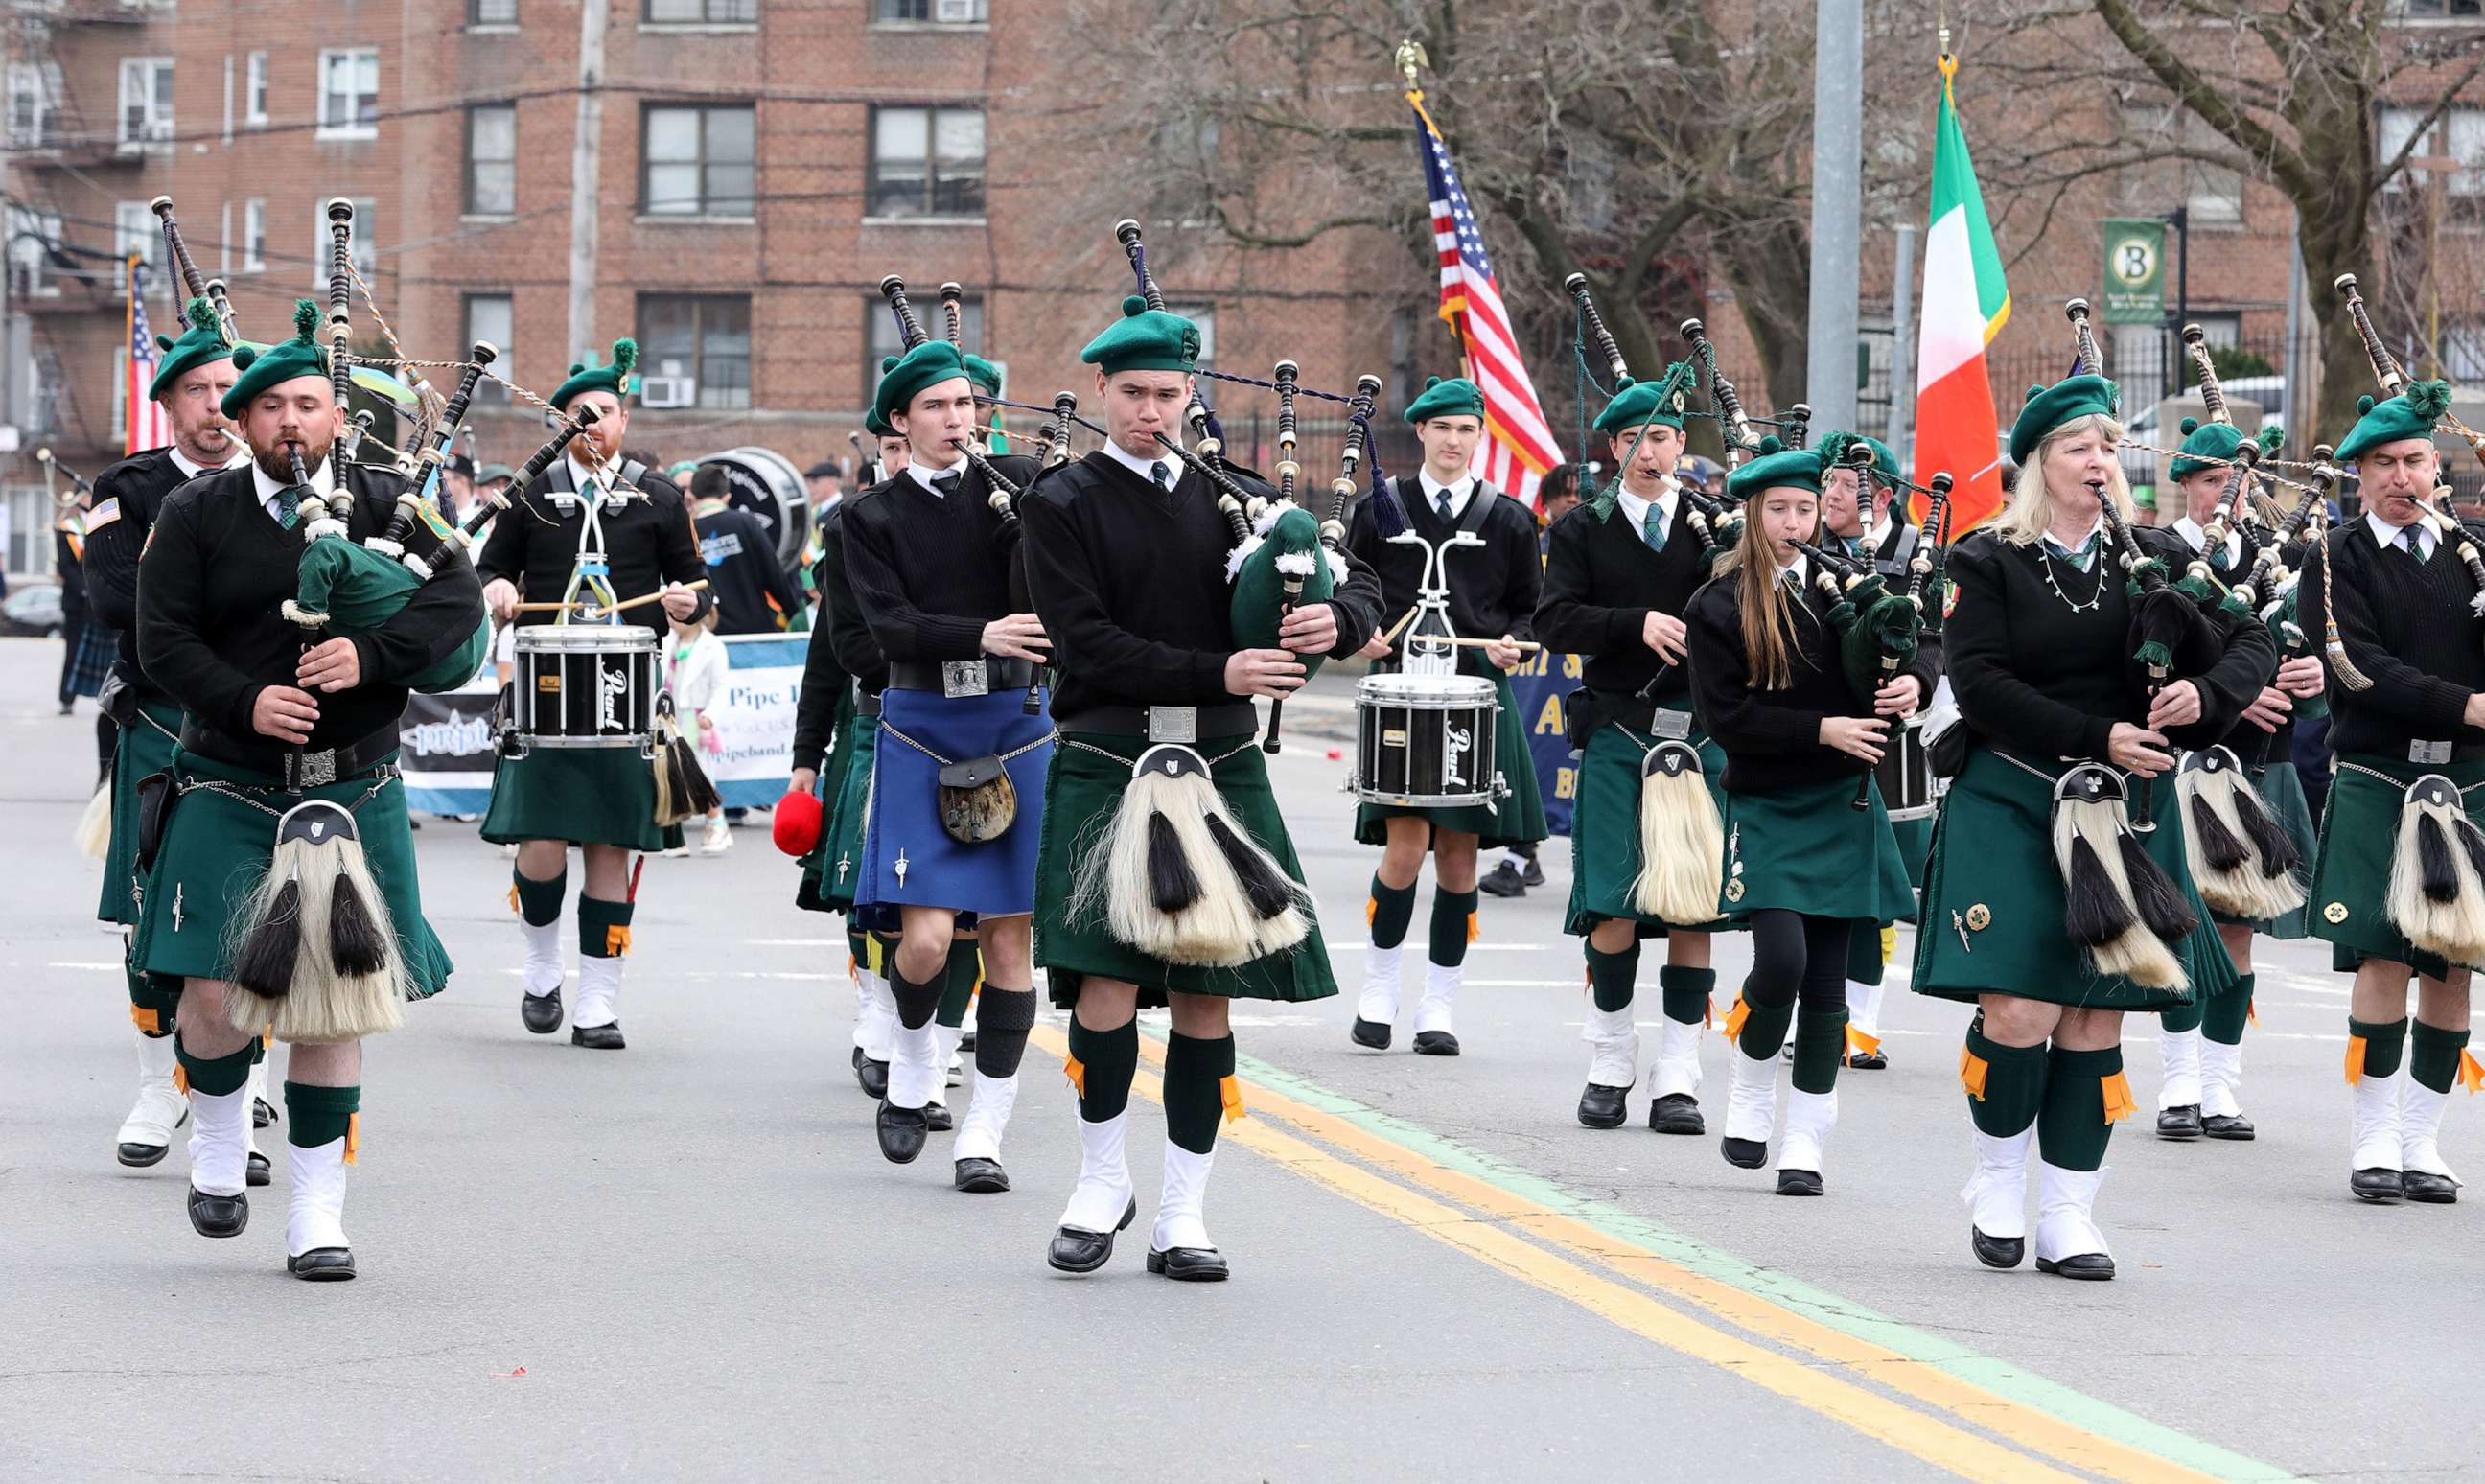 PHOTO: In this March 19, 2022, file photo, bagpipers march in the St. Patrick's Day Parade in Yonkers, N.Y.